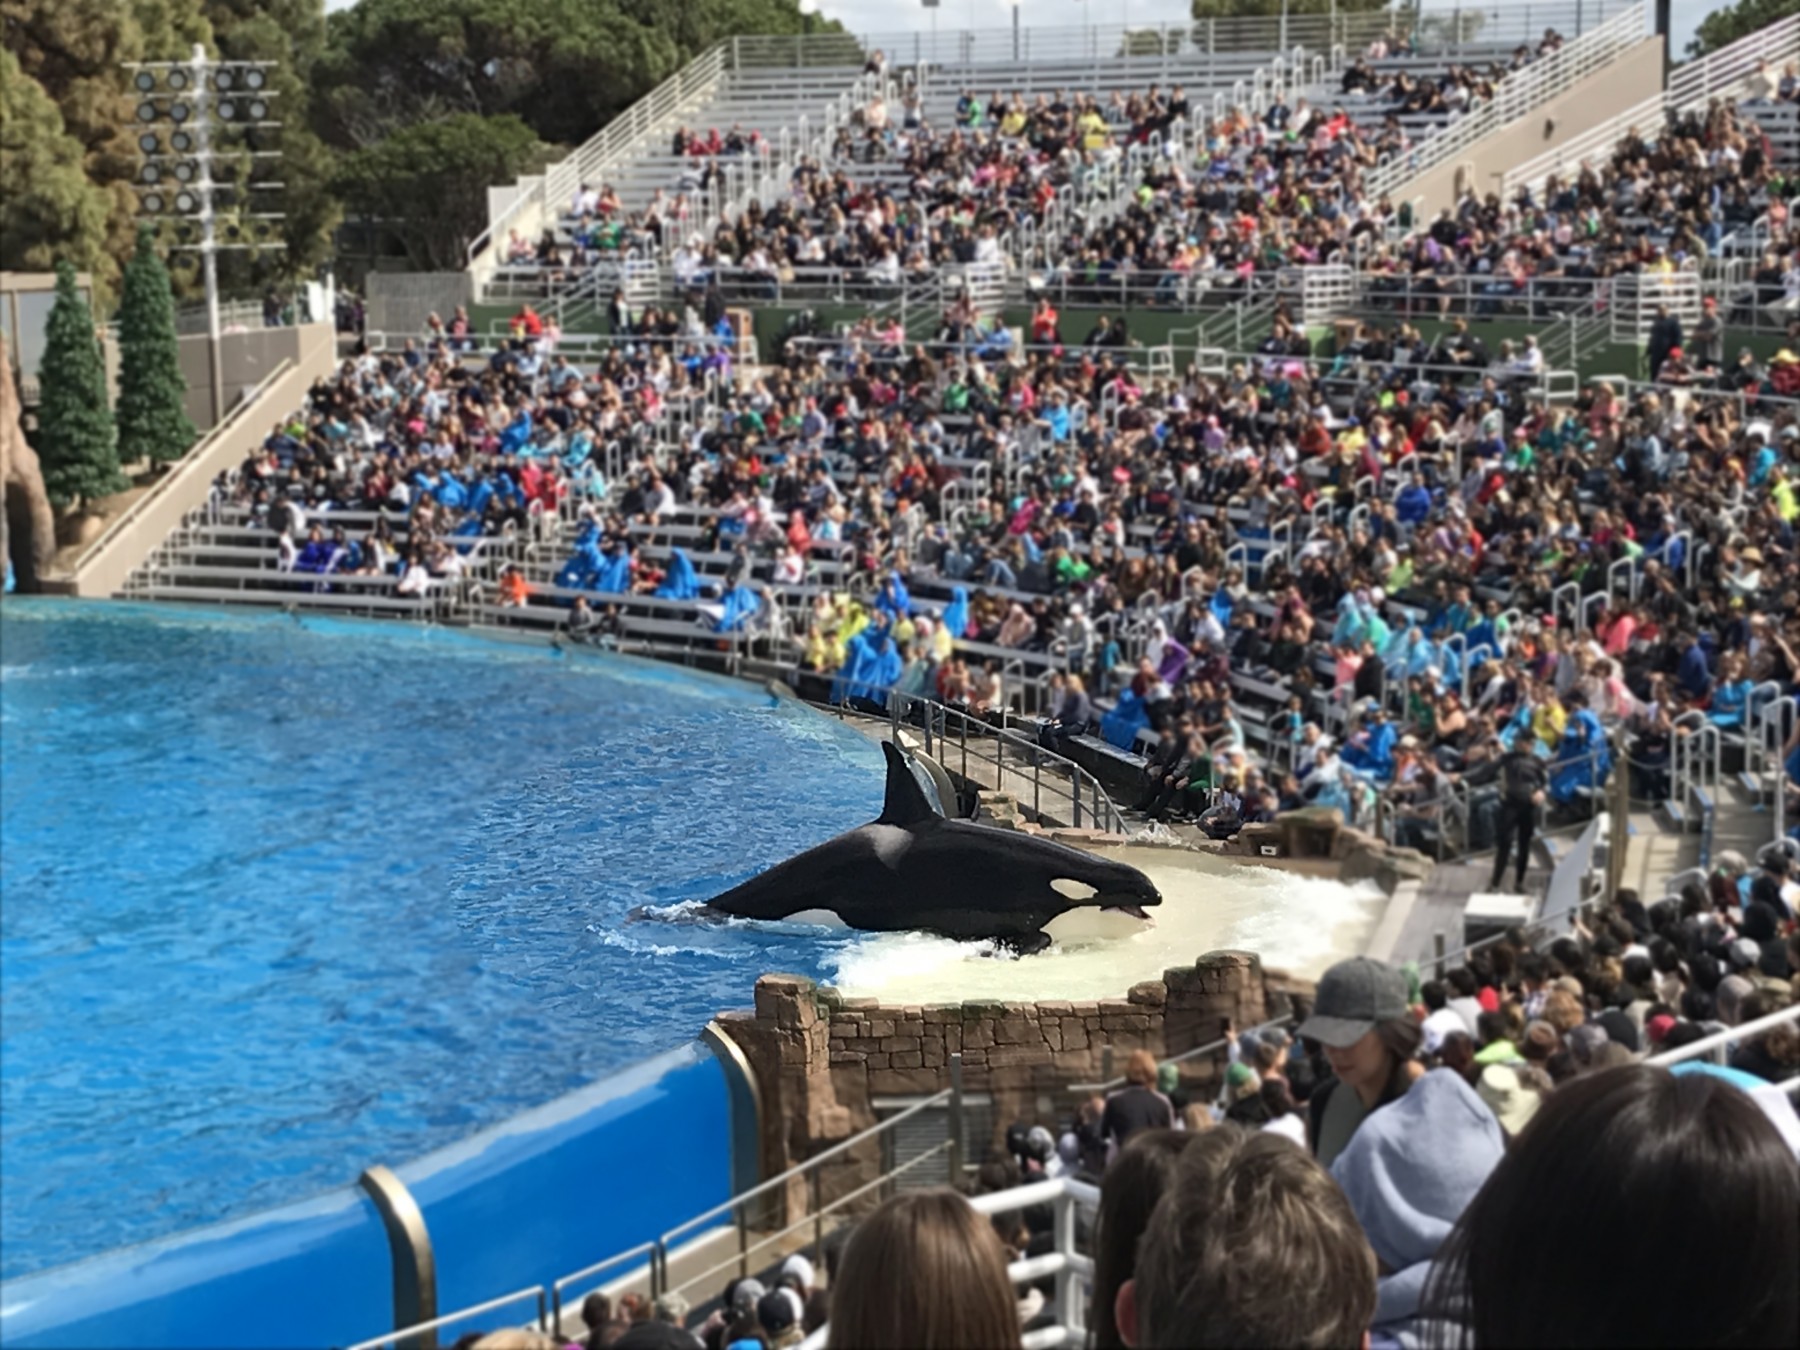 An orca performing to crowd at SeaWorld San Diego